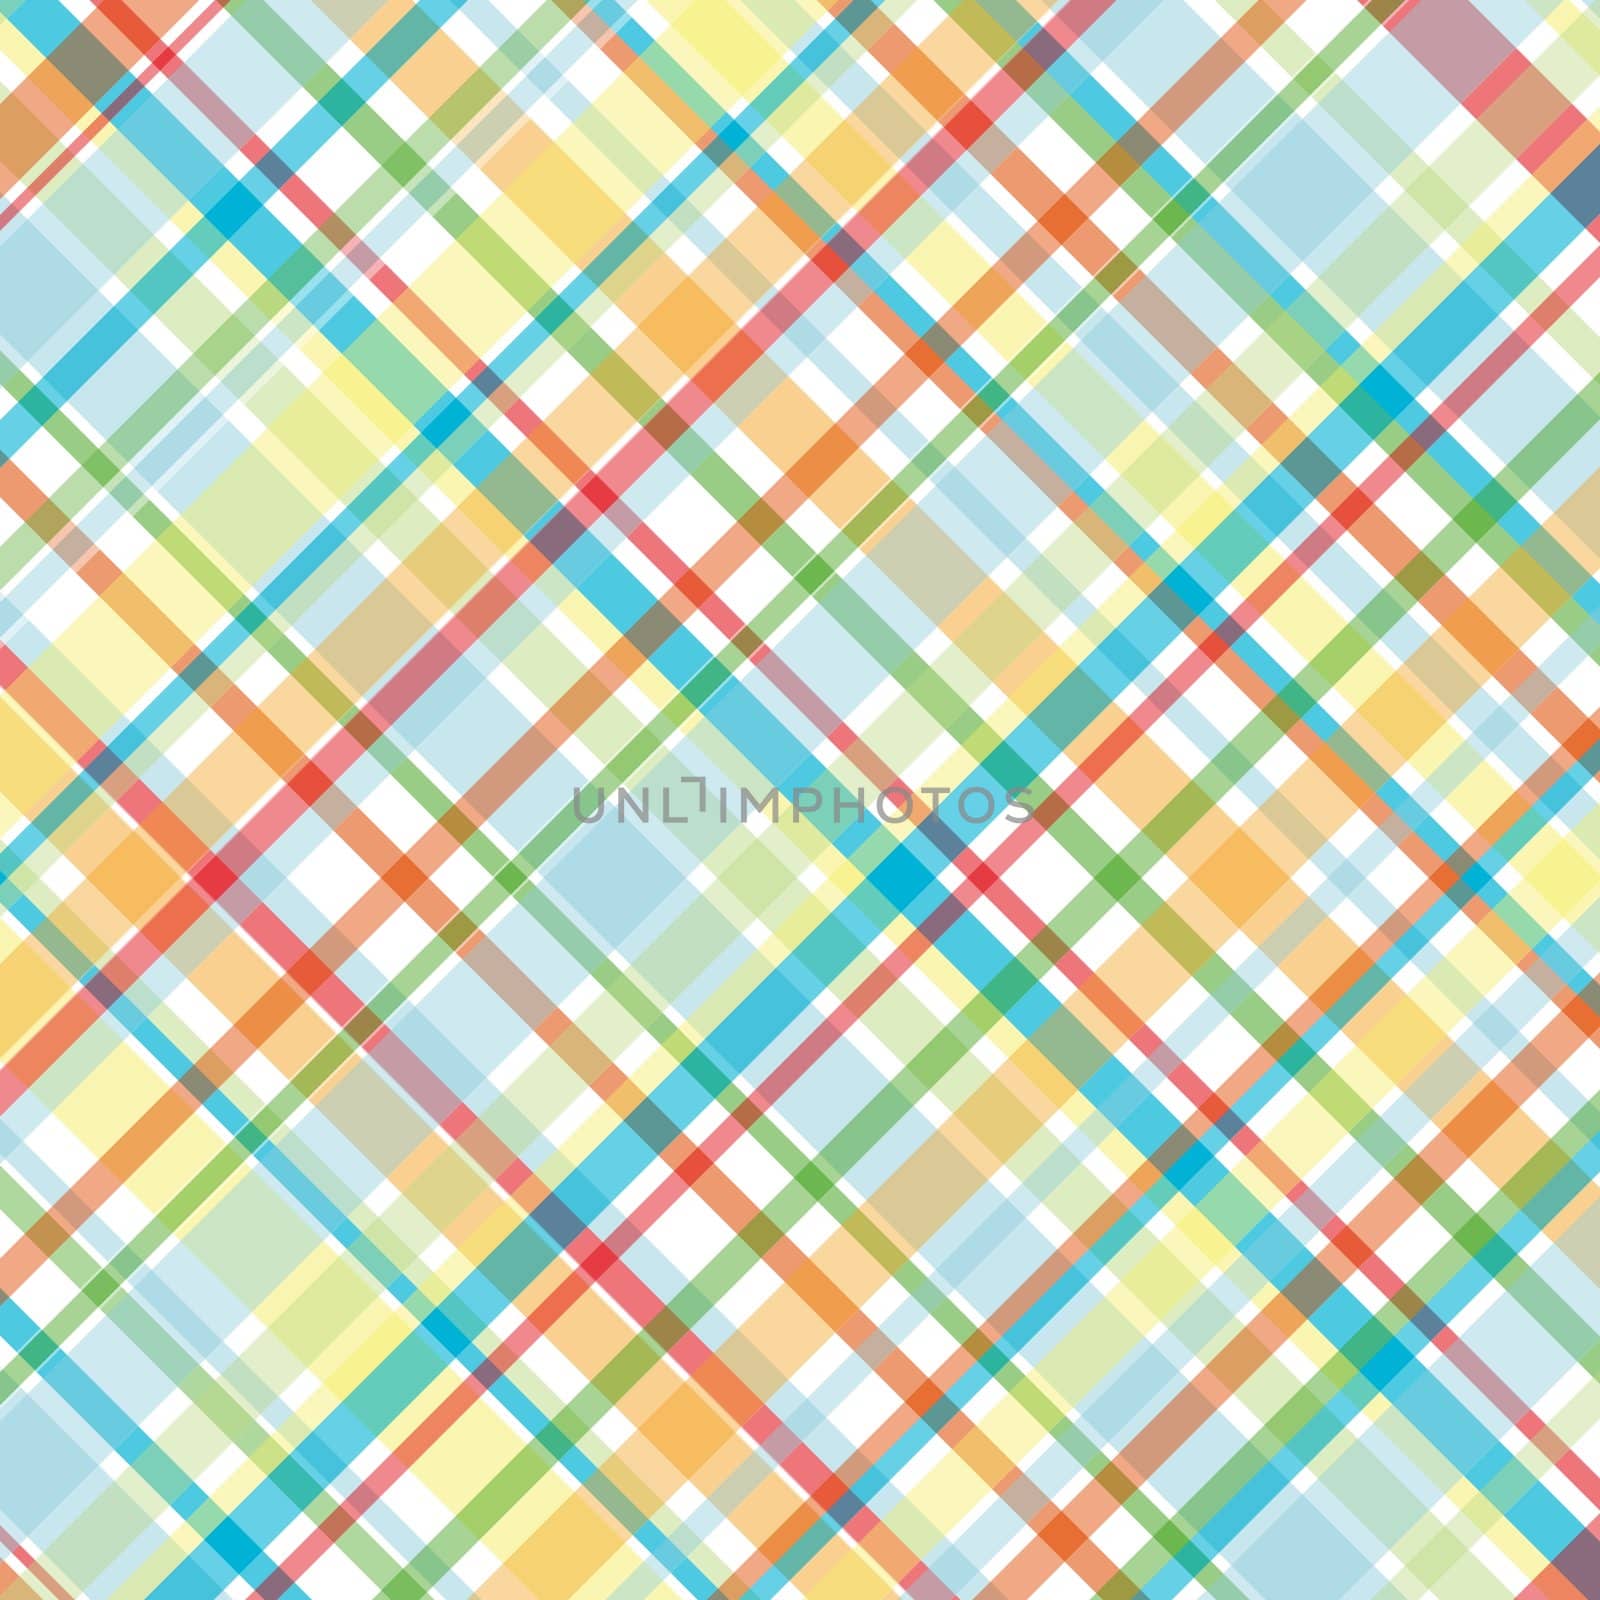 Plaid background illustration in bright summer colors